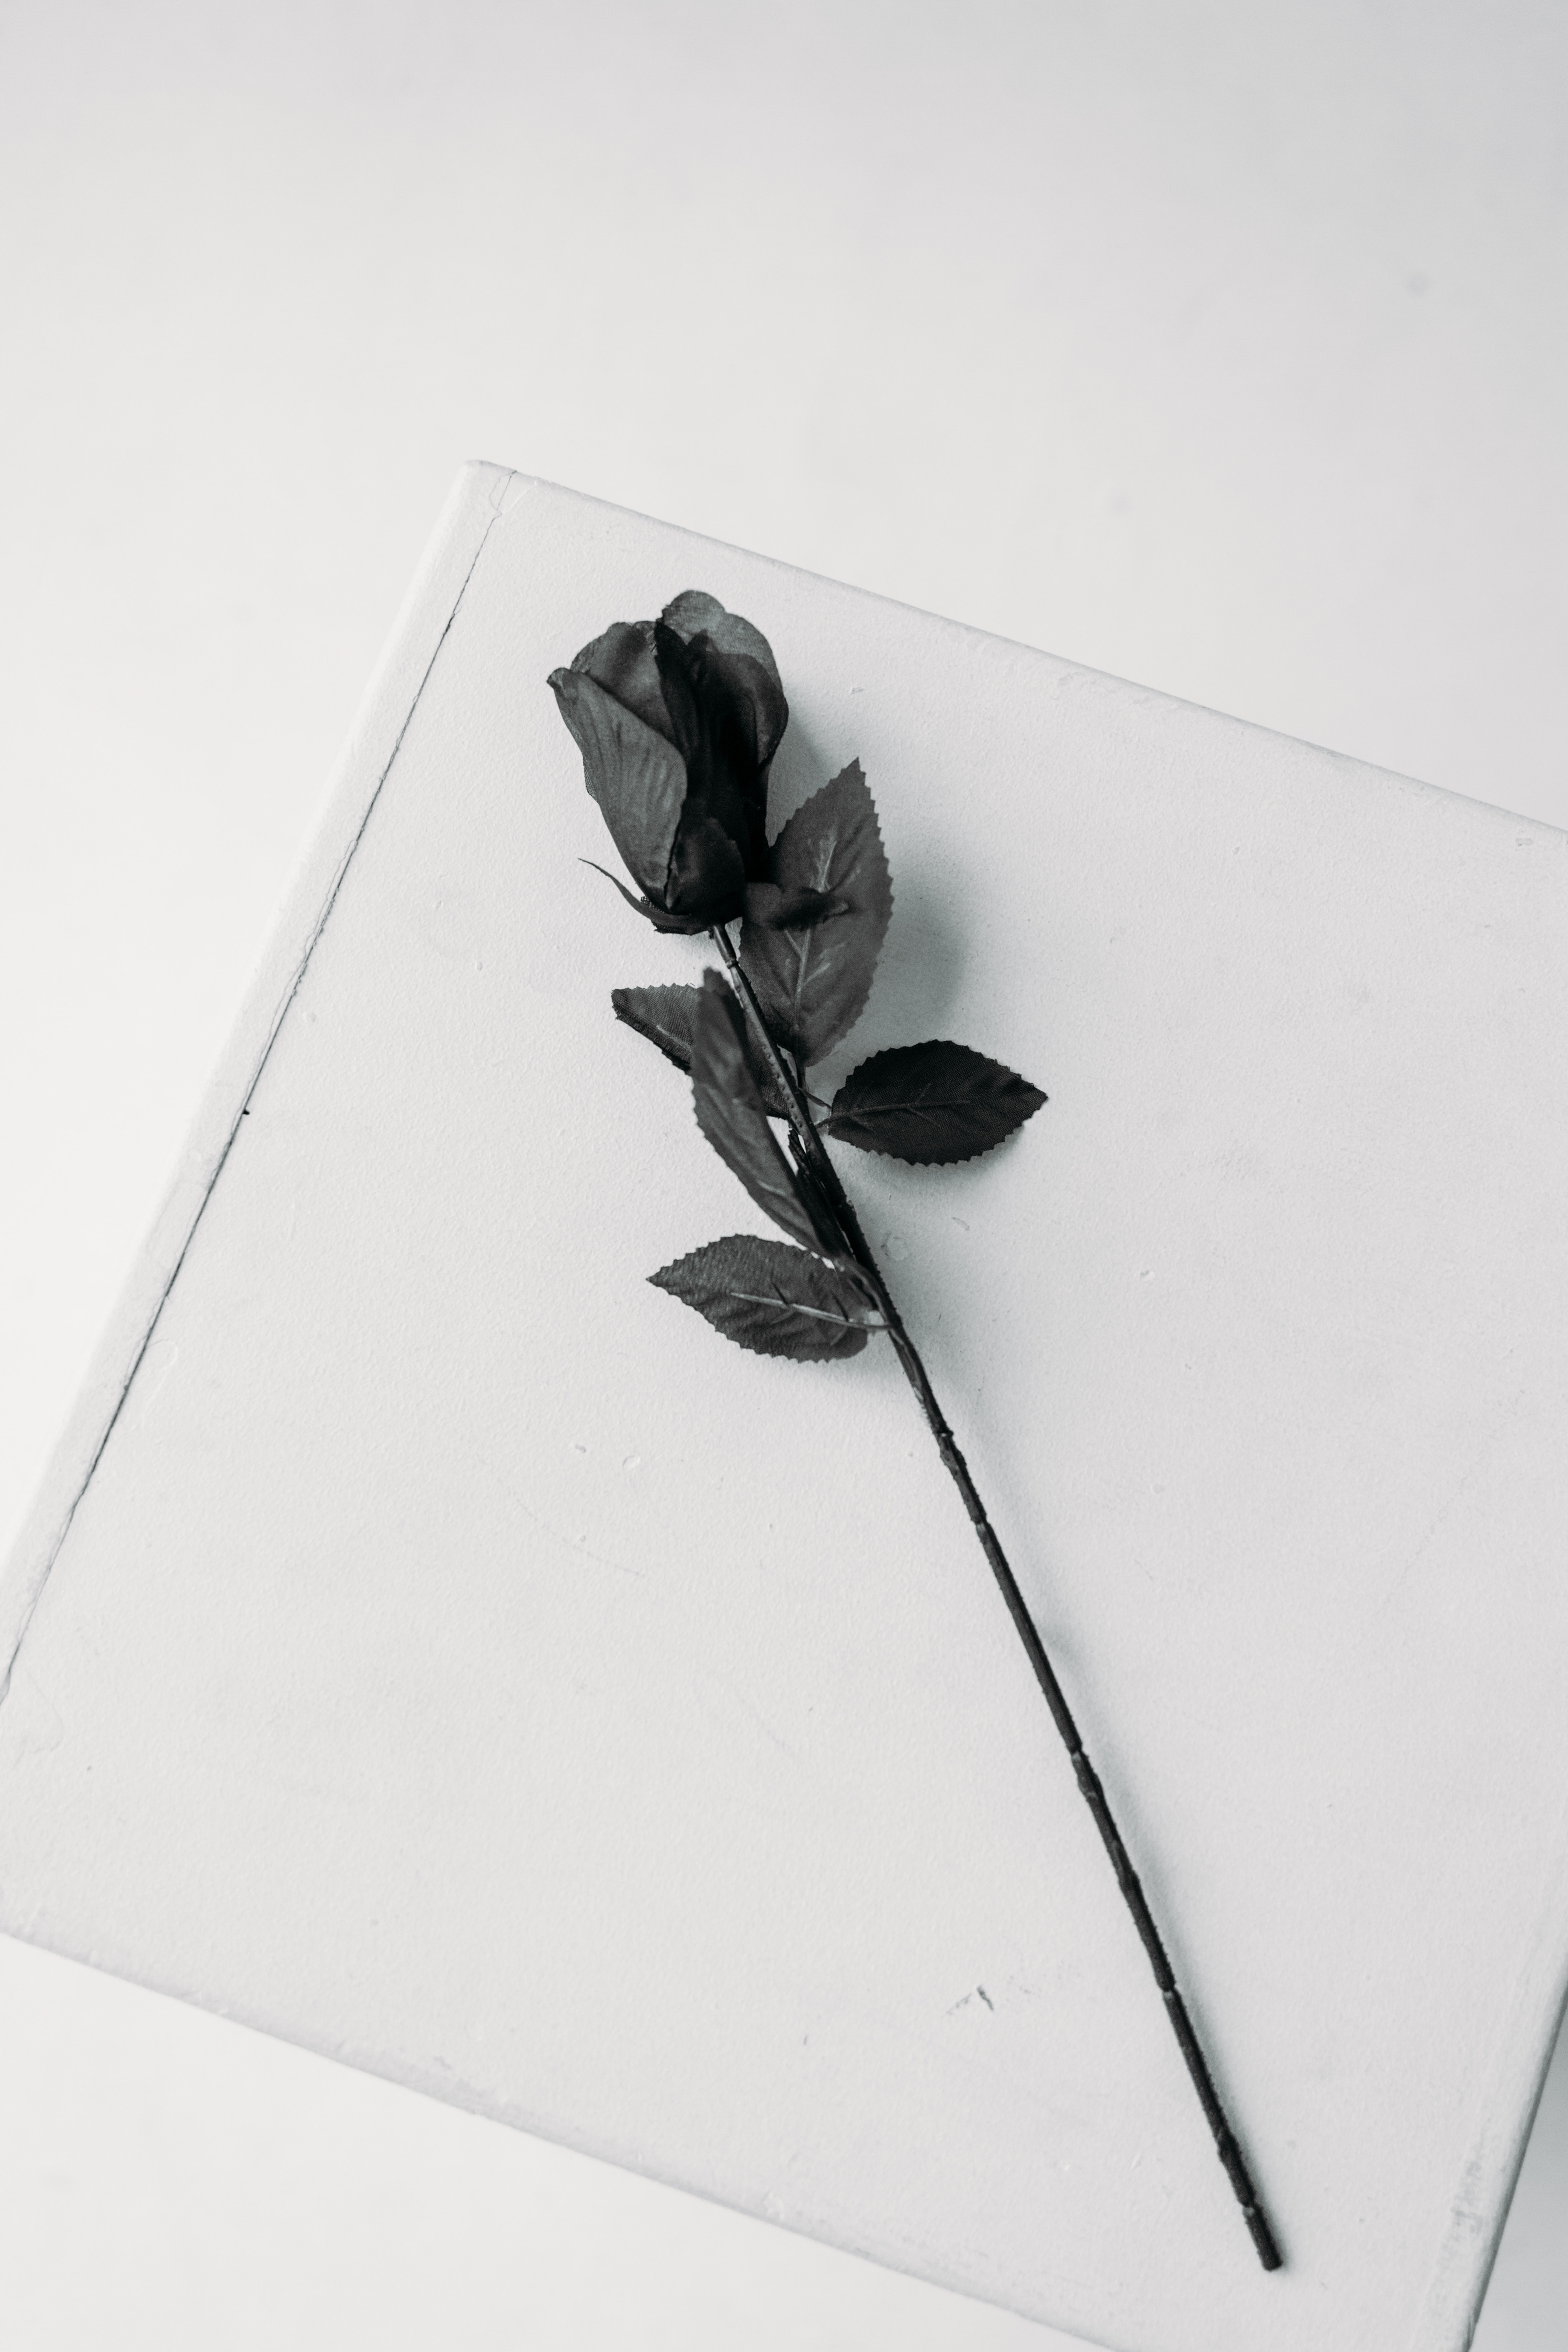 Black rose photos download the best free black rose stock photos hd images